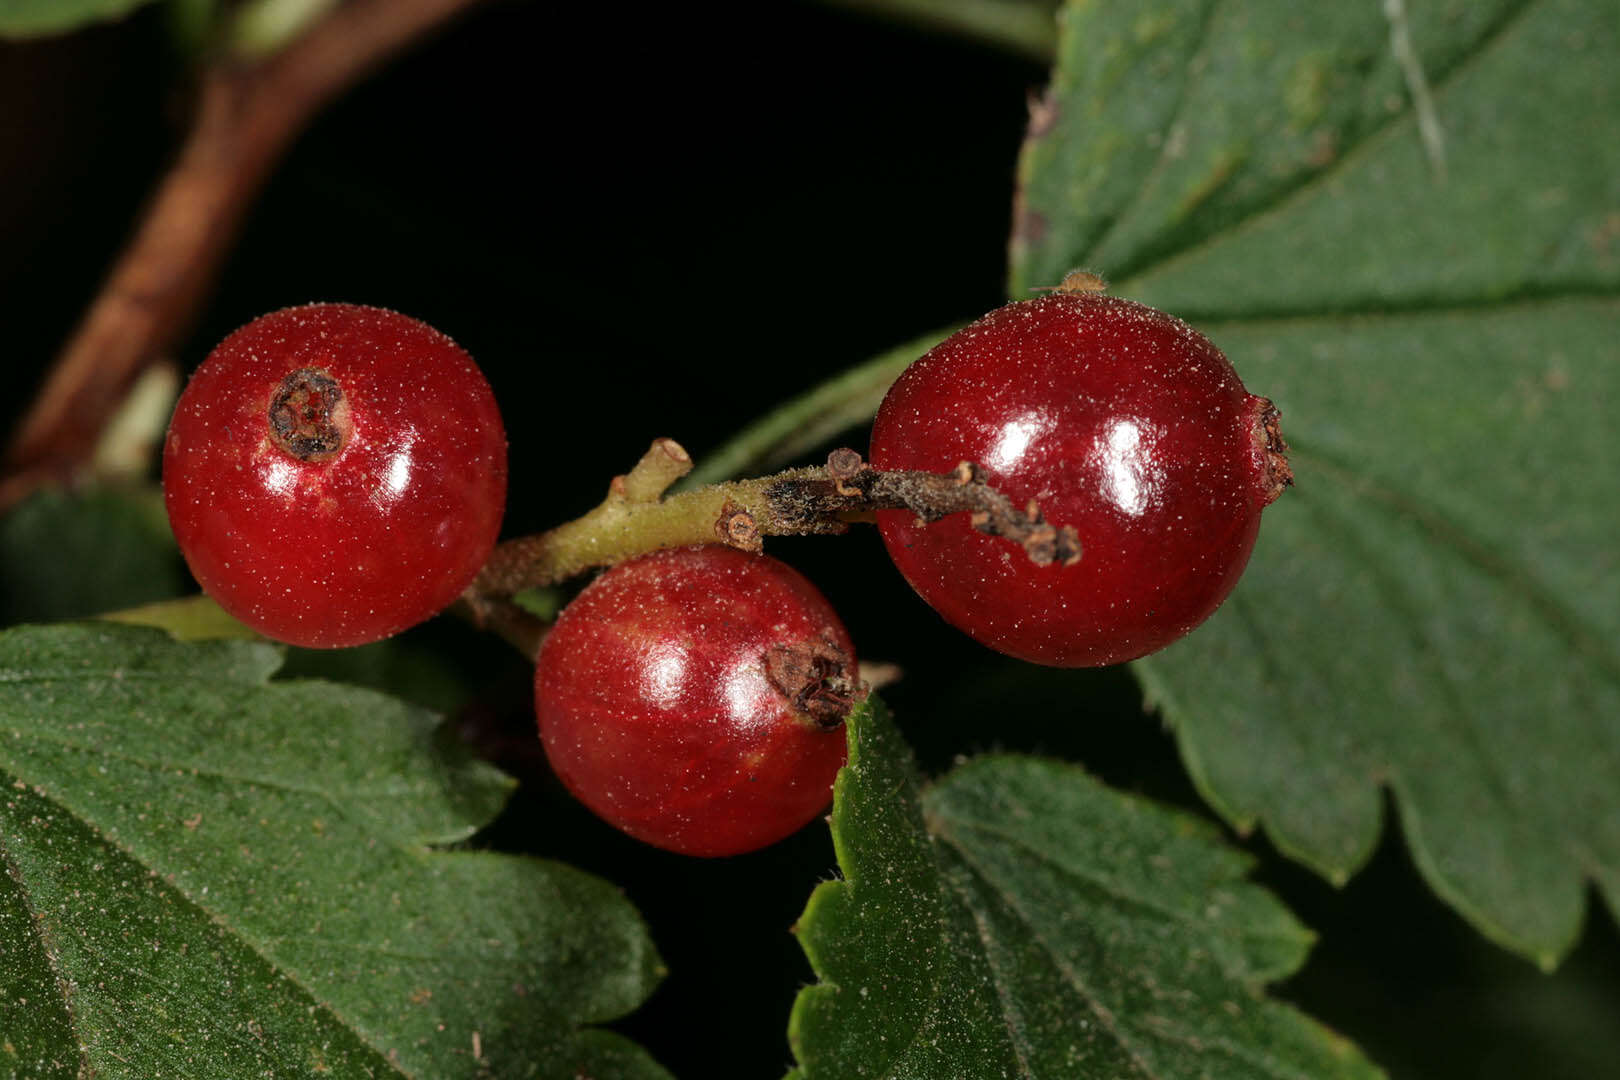 Image of Mountain Currant